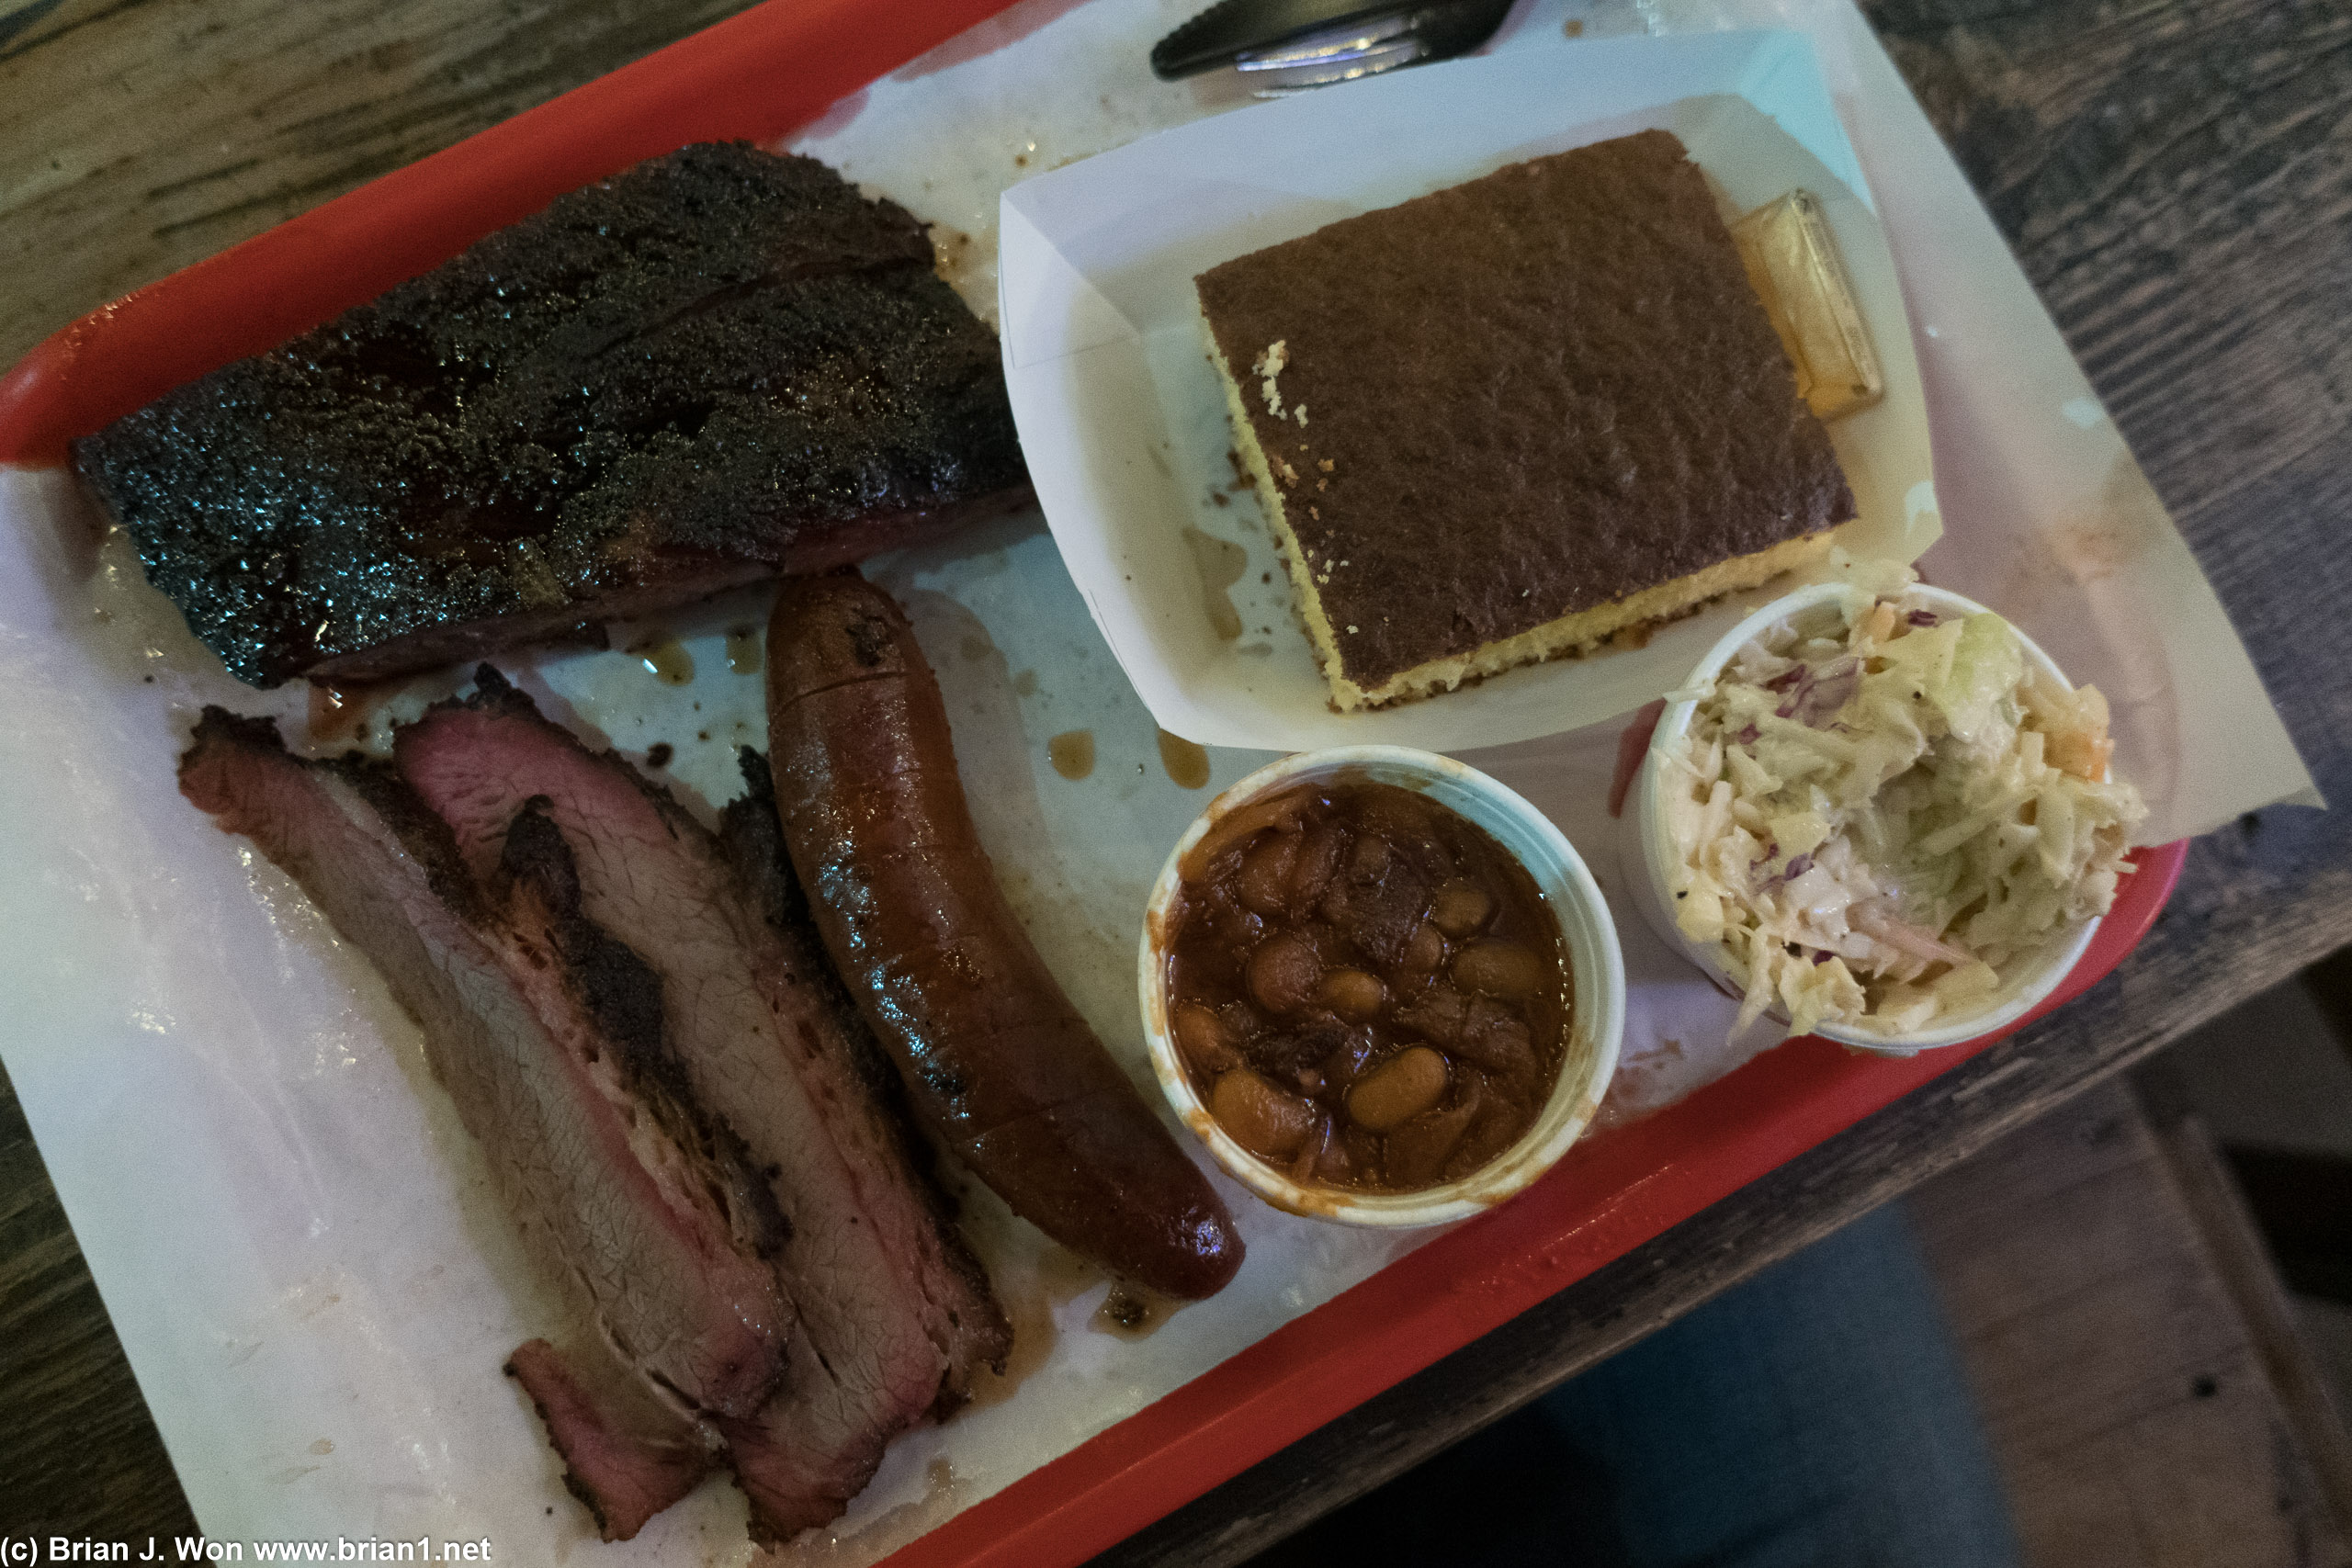 BBQ at Holy Smoke in Bishop was not good, although the tri-tip and cornbread were okay.